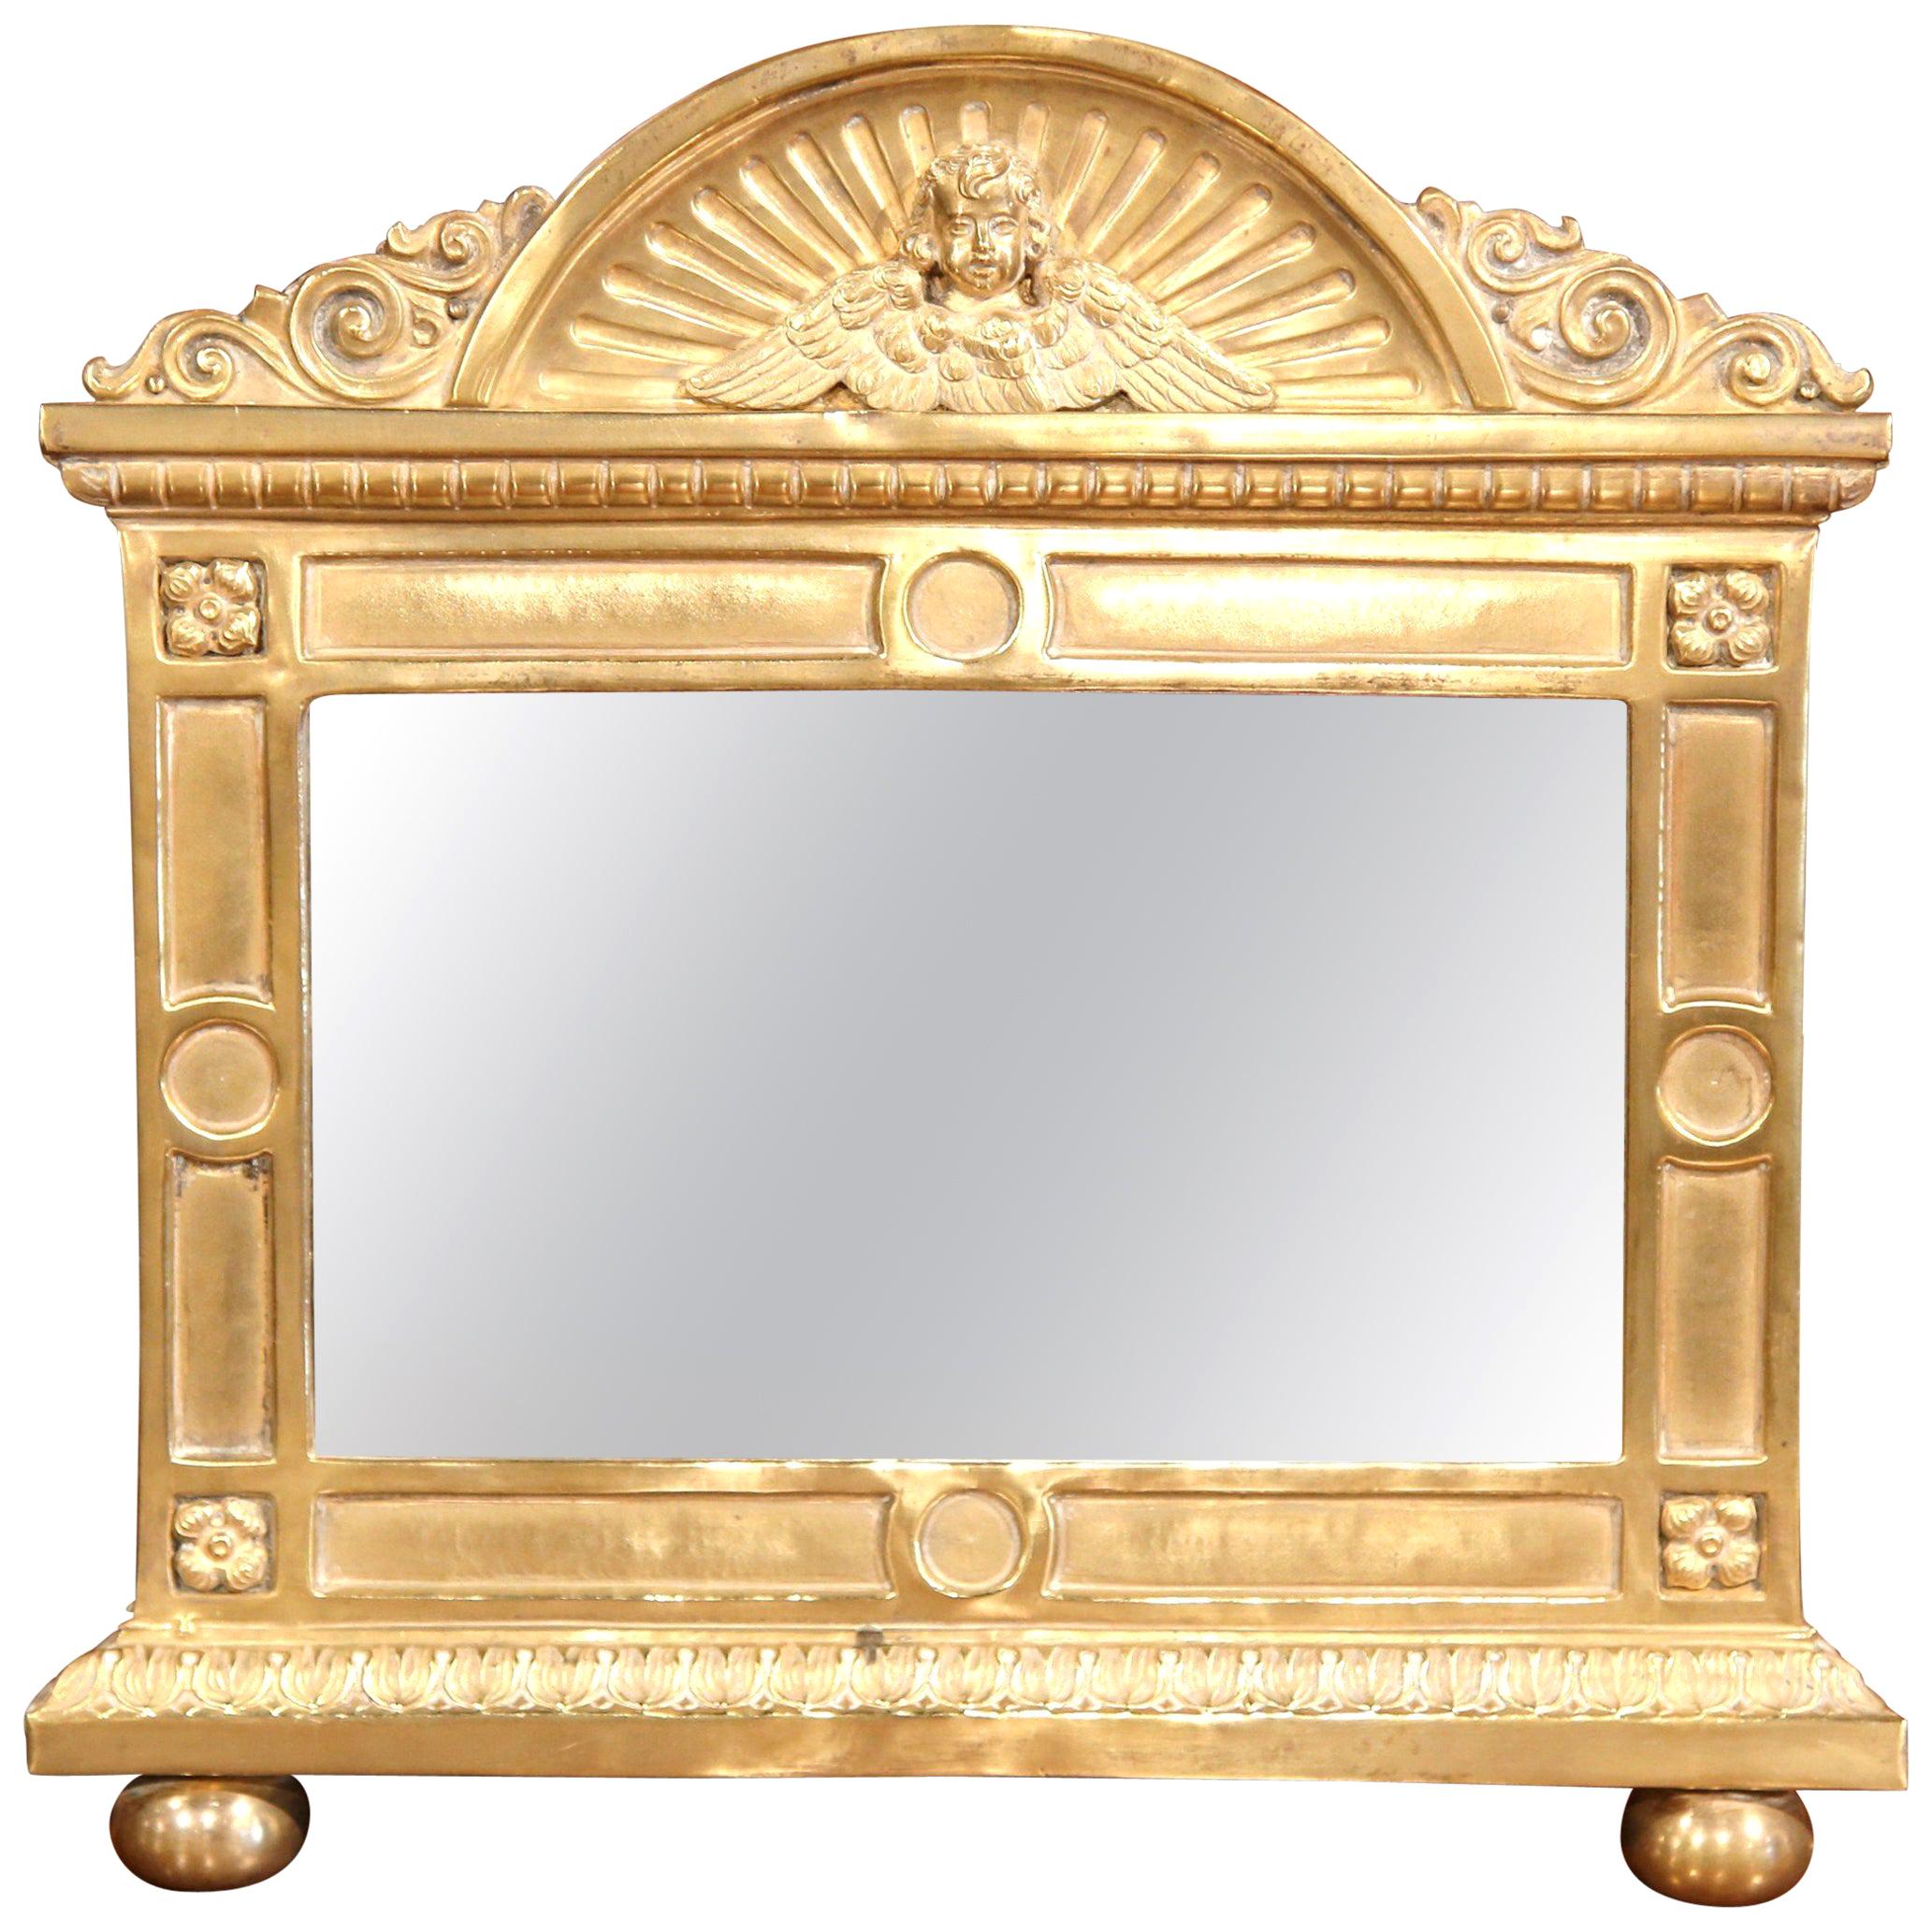 19th Century French Repousse Brass Wall Mirror with Cherub Face Decor